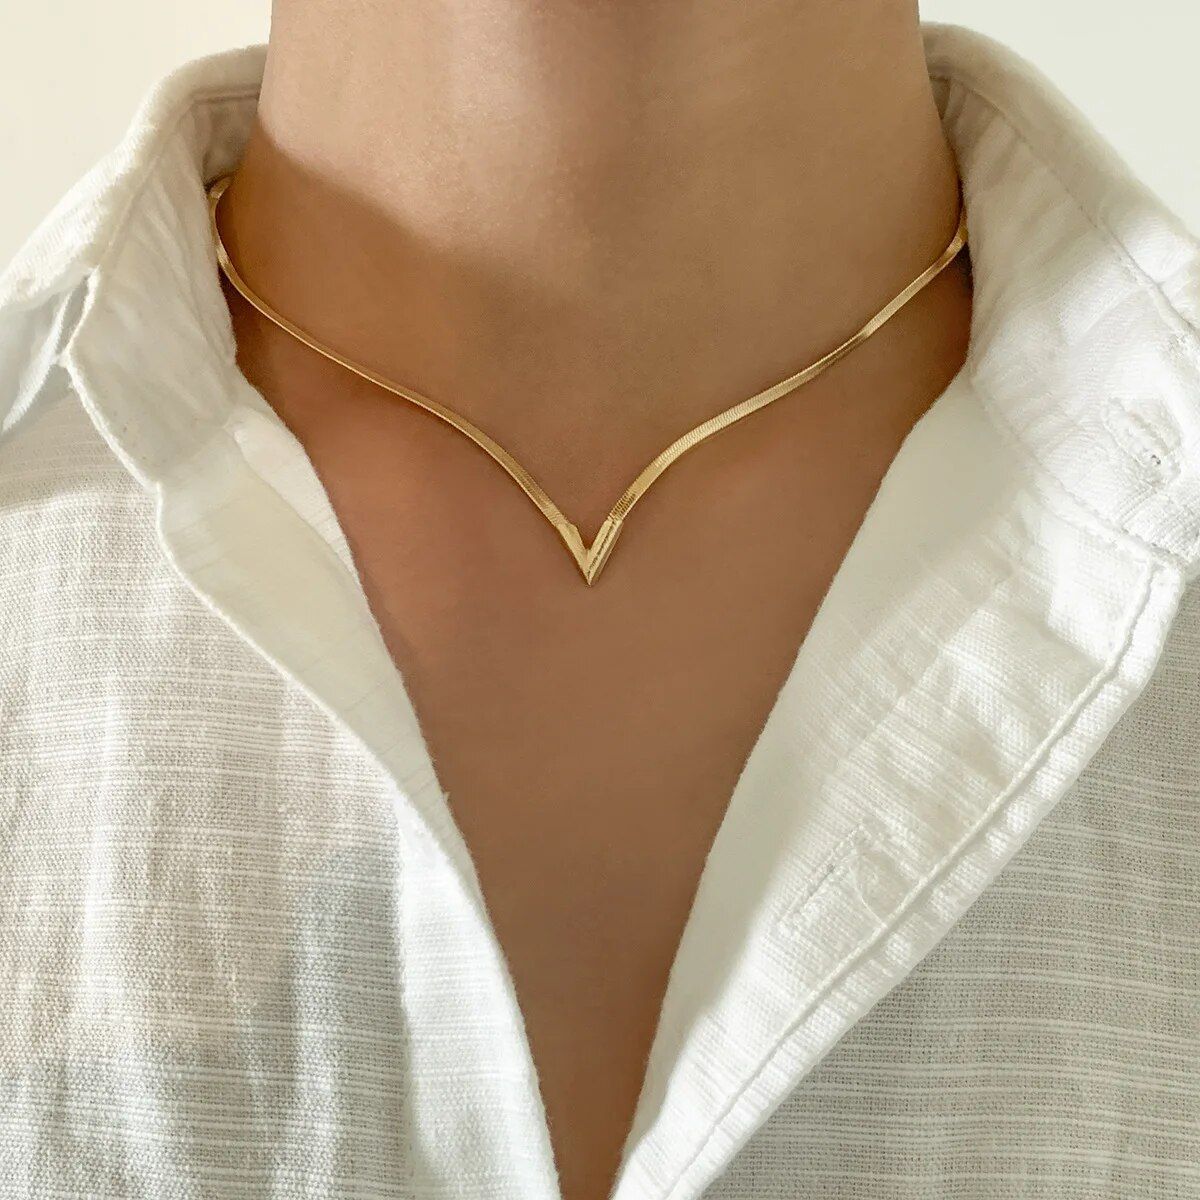 A person wearing a white shirt and an Elegant V-Shaped Flat Snake Chain Necklace, a key fashion accessory, against a light background.